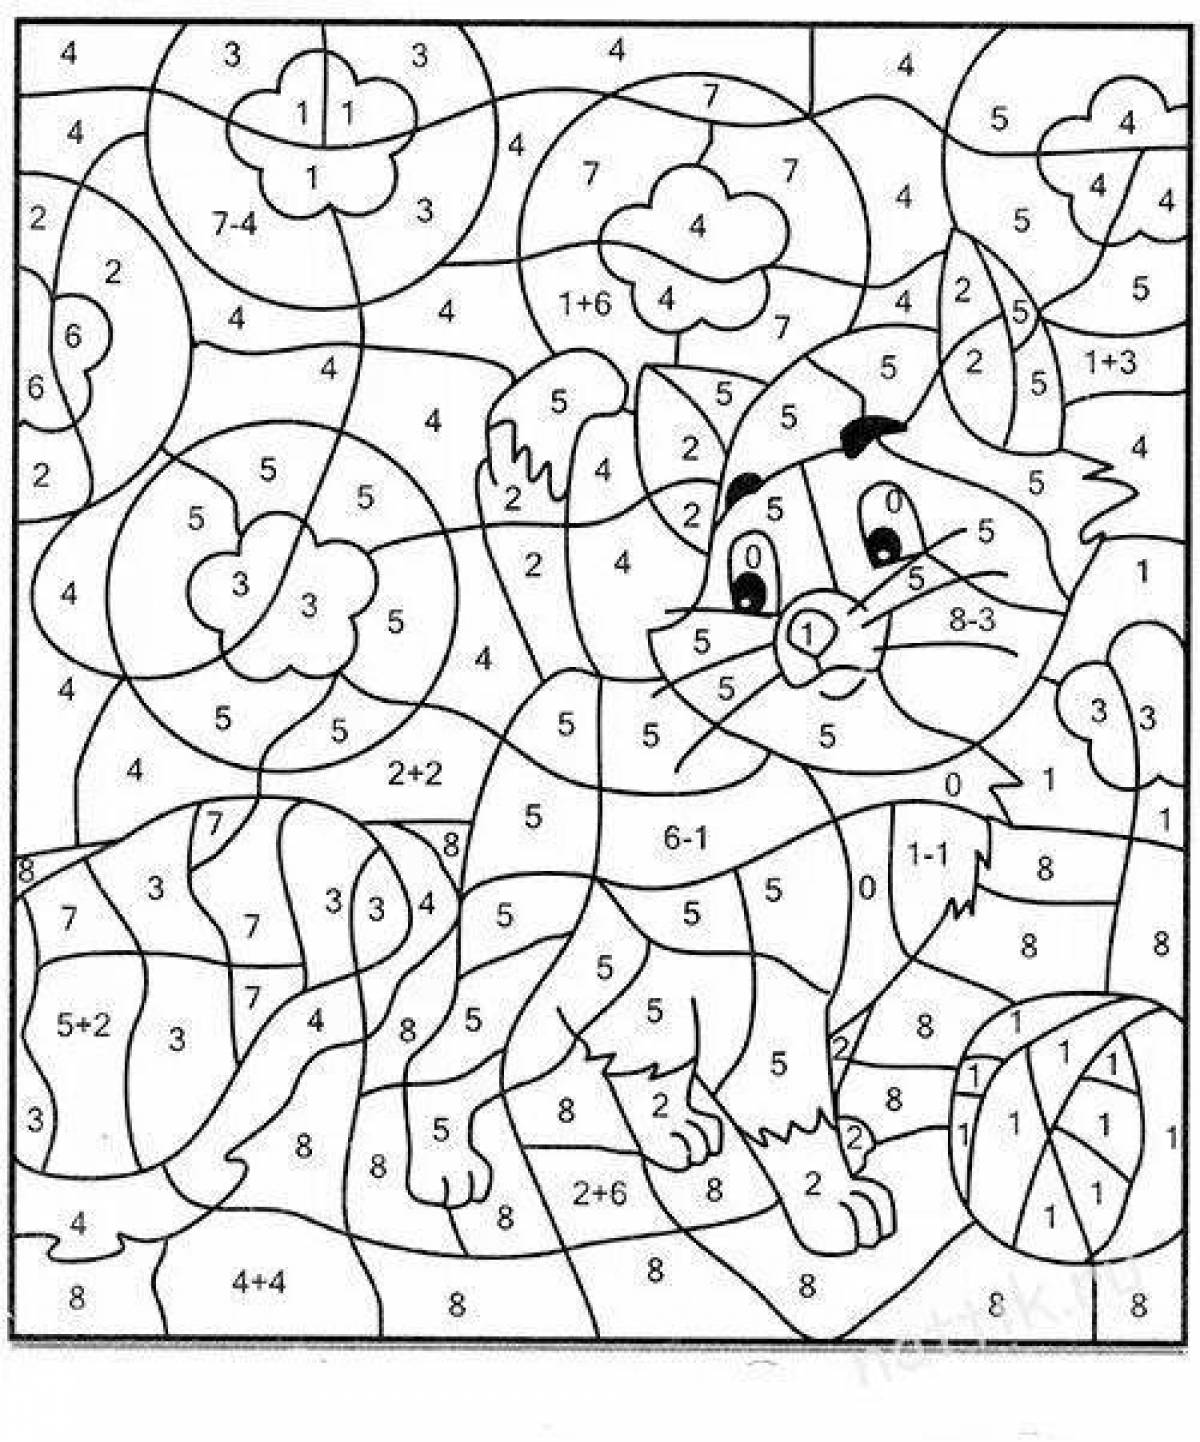 Complex cat coloring by number